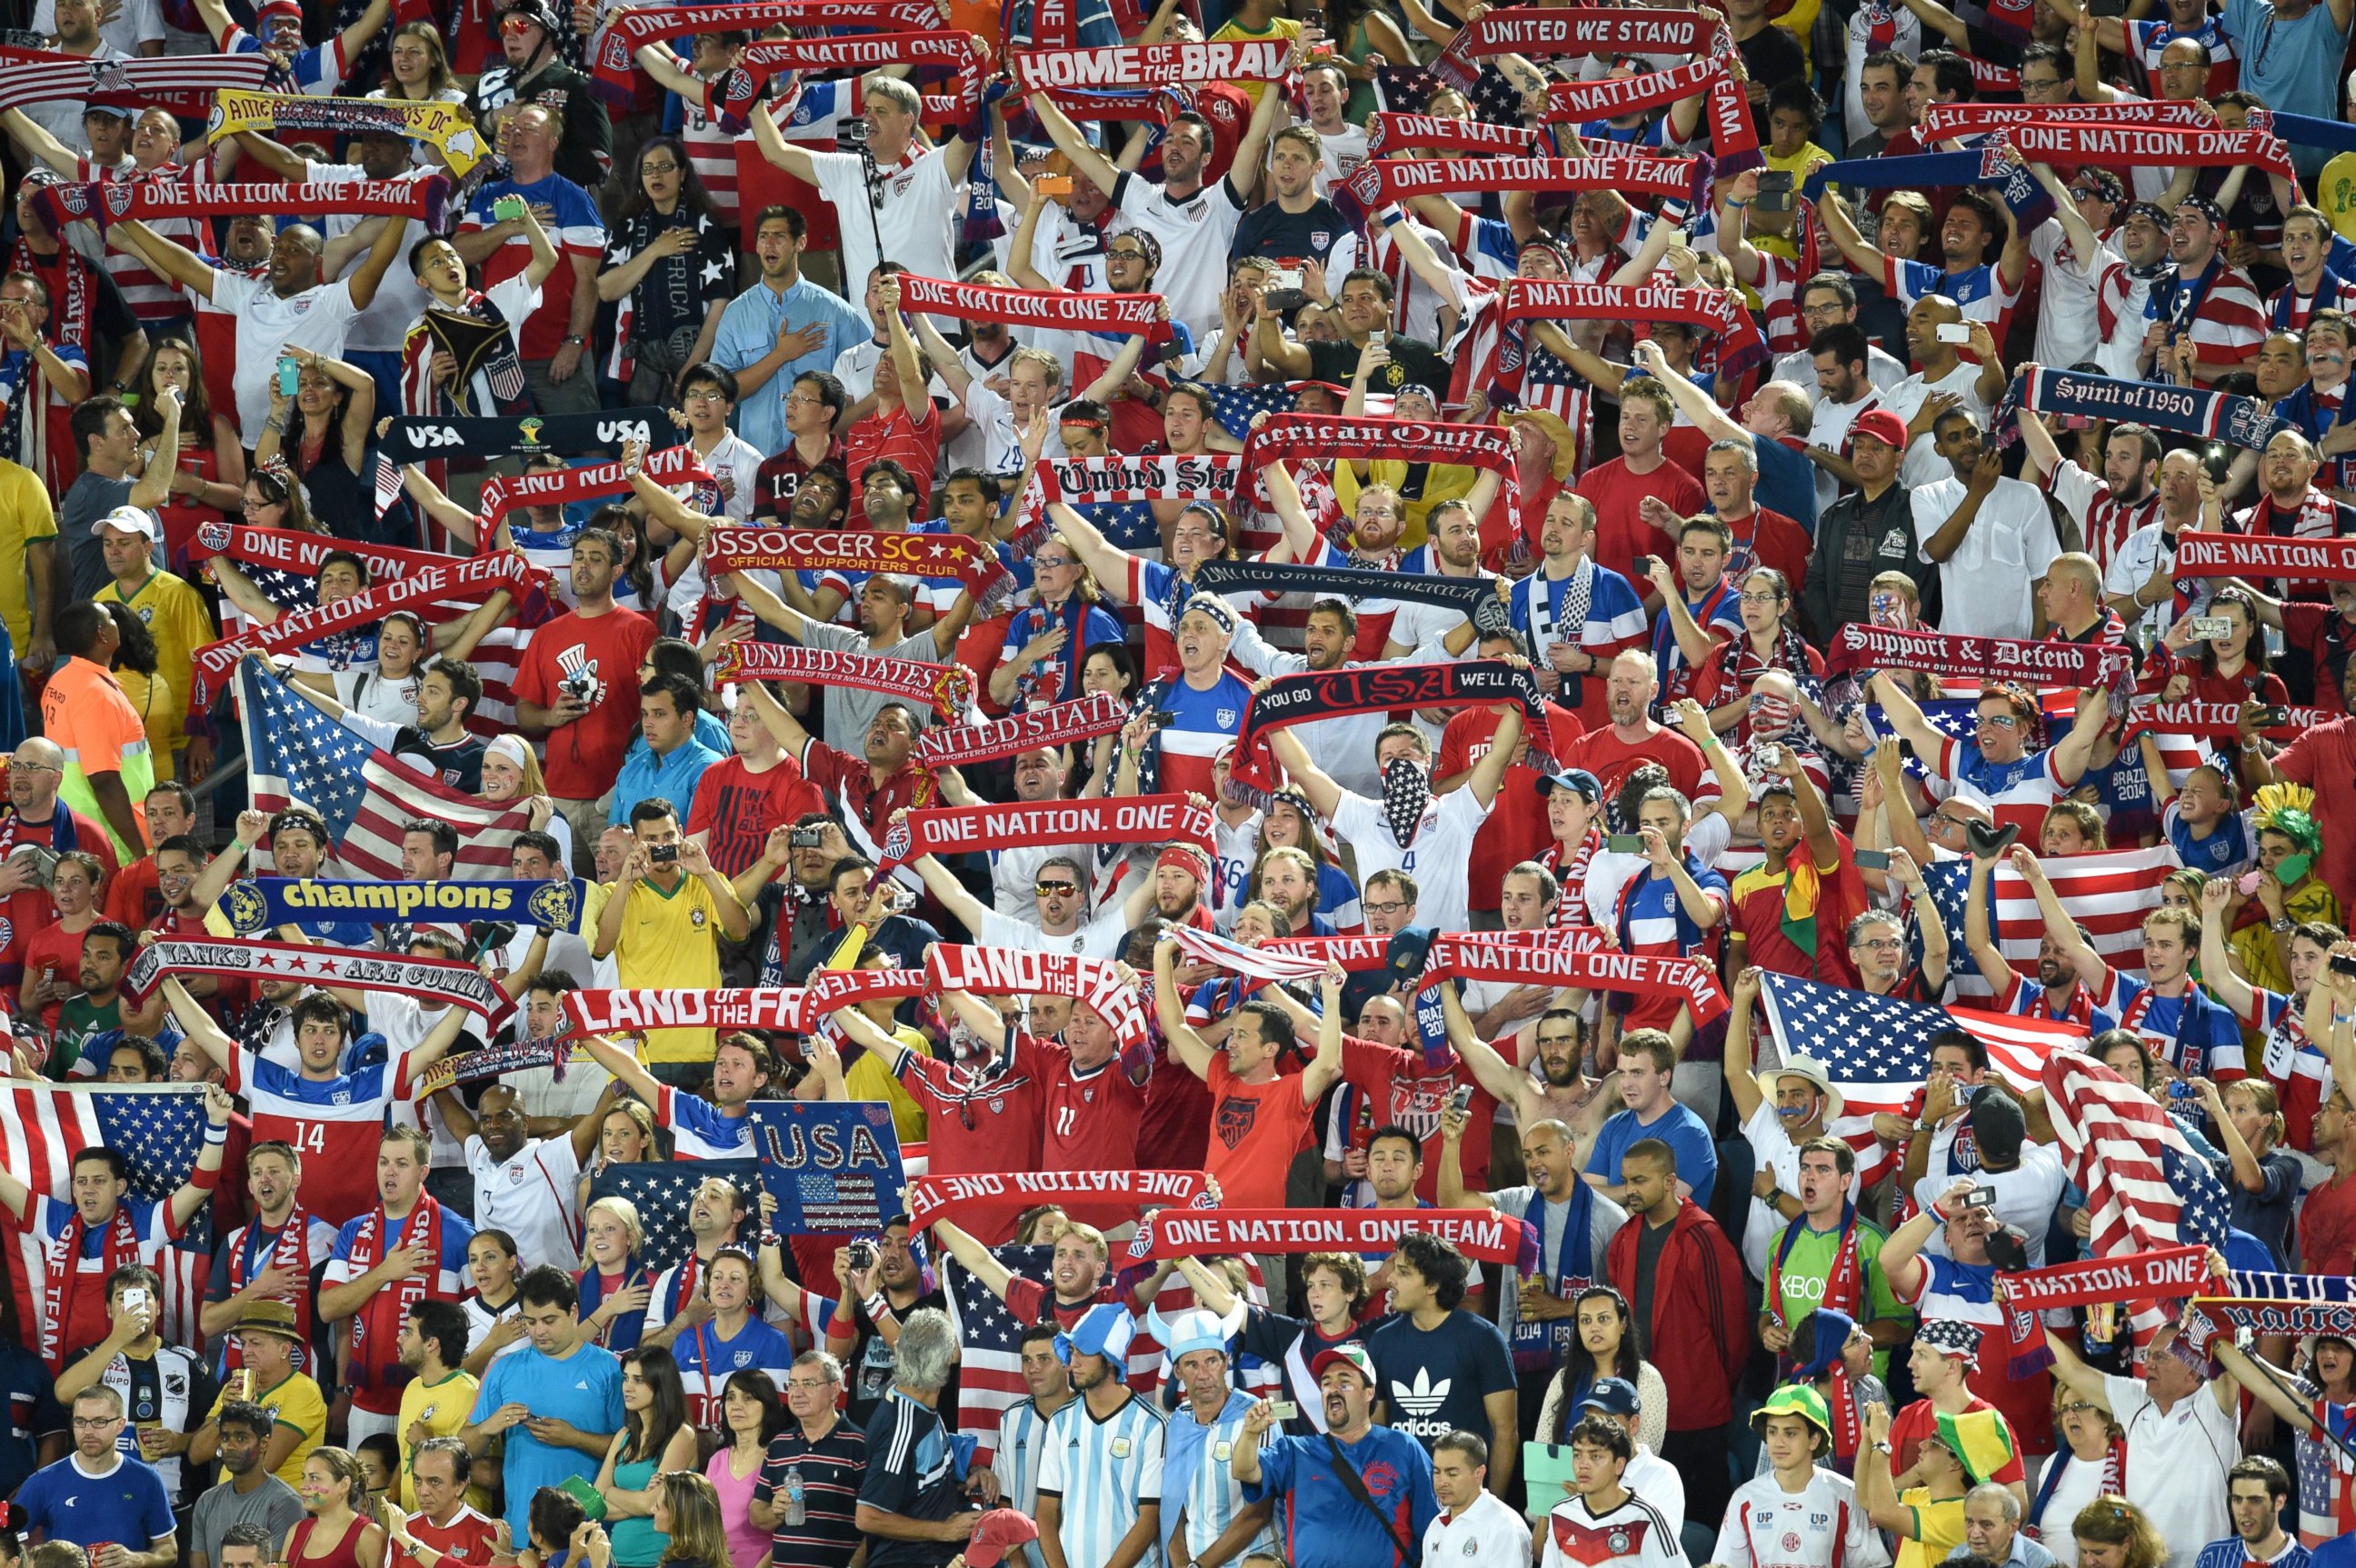 PHOTO: U.S. fans cheer prior to the 2014 FIFA World Cup Brazil Group G match between Ghana and the United States at Estadio das Dunas, June 16, 2014 in Natal, Brazil